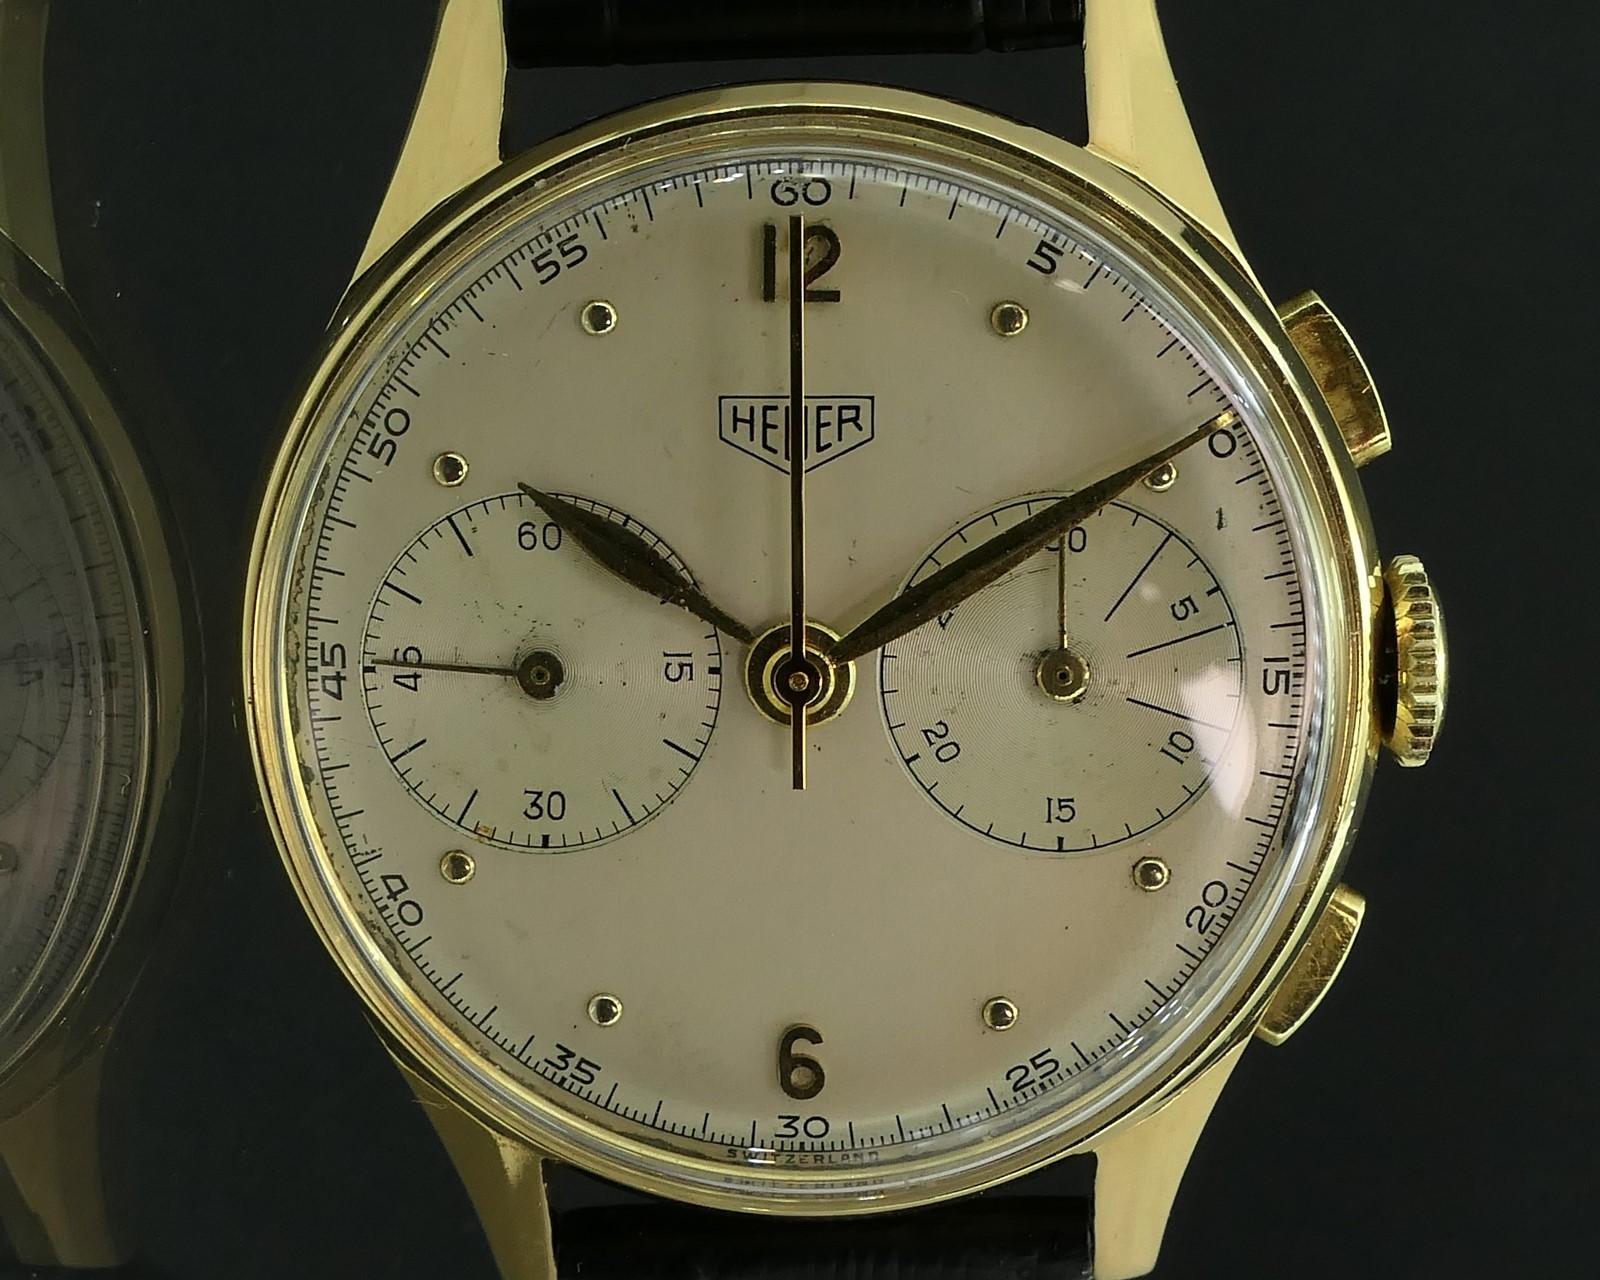 Stunning 1940s - 1950s collectible wristwatch from Heuer featuring a solid 18k gold case. This watch is all original, with the dial being in incredible condition. This watch comes with the rare Valjoux 23 movement inside. This is the unique 